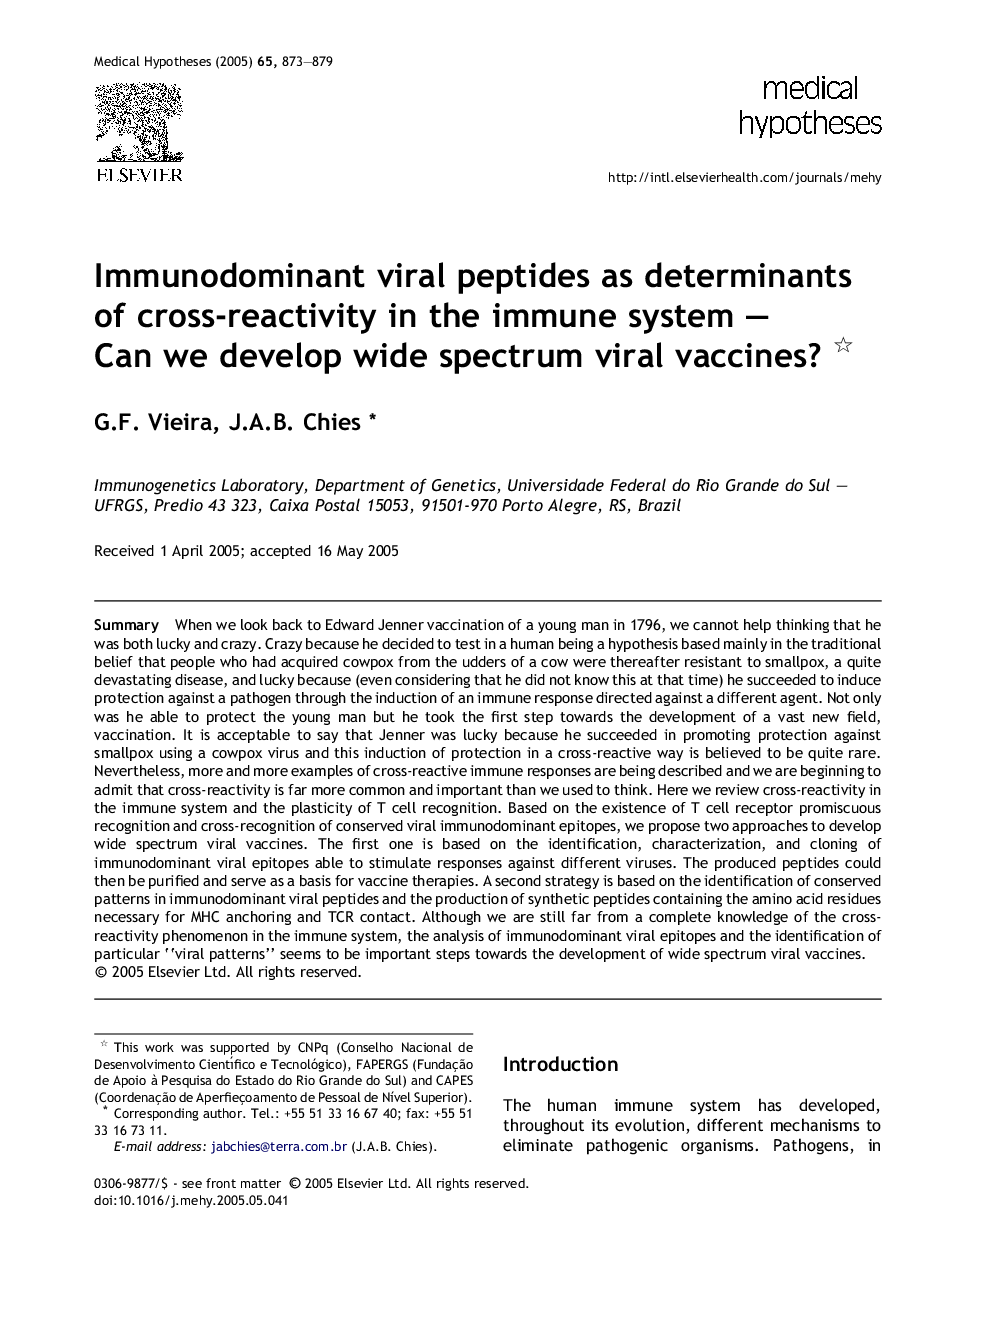 Immunodominant viral peptides as determinants of cross-reactivity in the immune system - Can we develop wide spectrum viral vaccines?